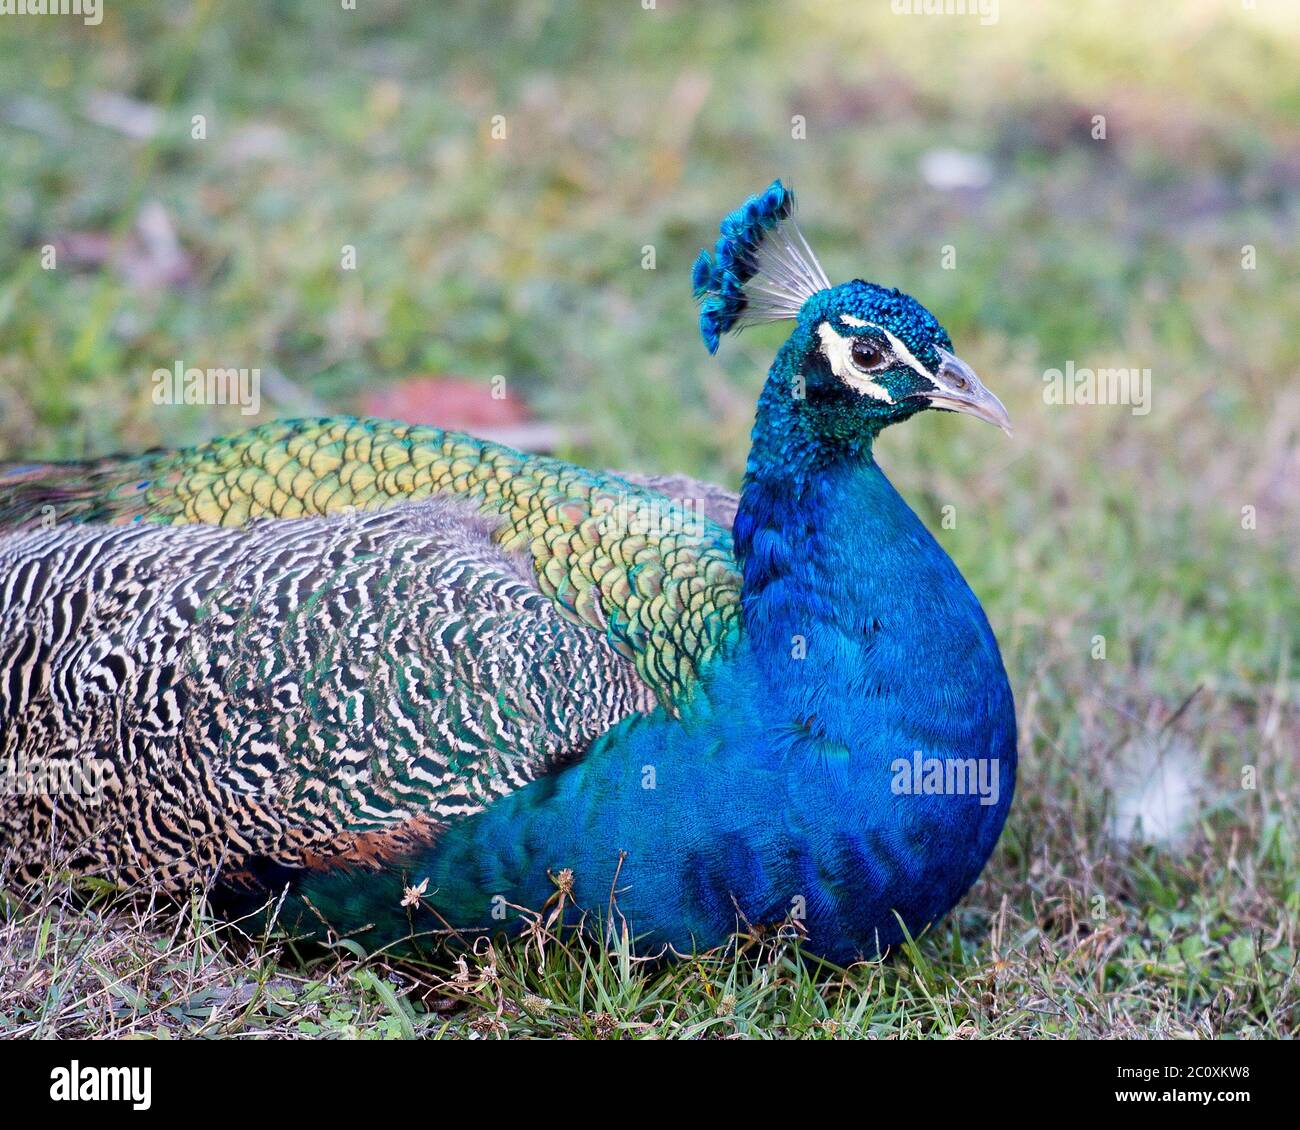 Peacock bird close-up profile view, the beautiful colorful bird resting on ground foliage in its environment and surrounding. Stock Photo